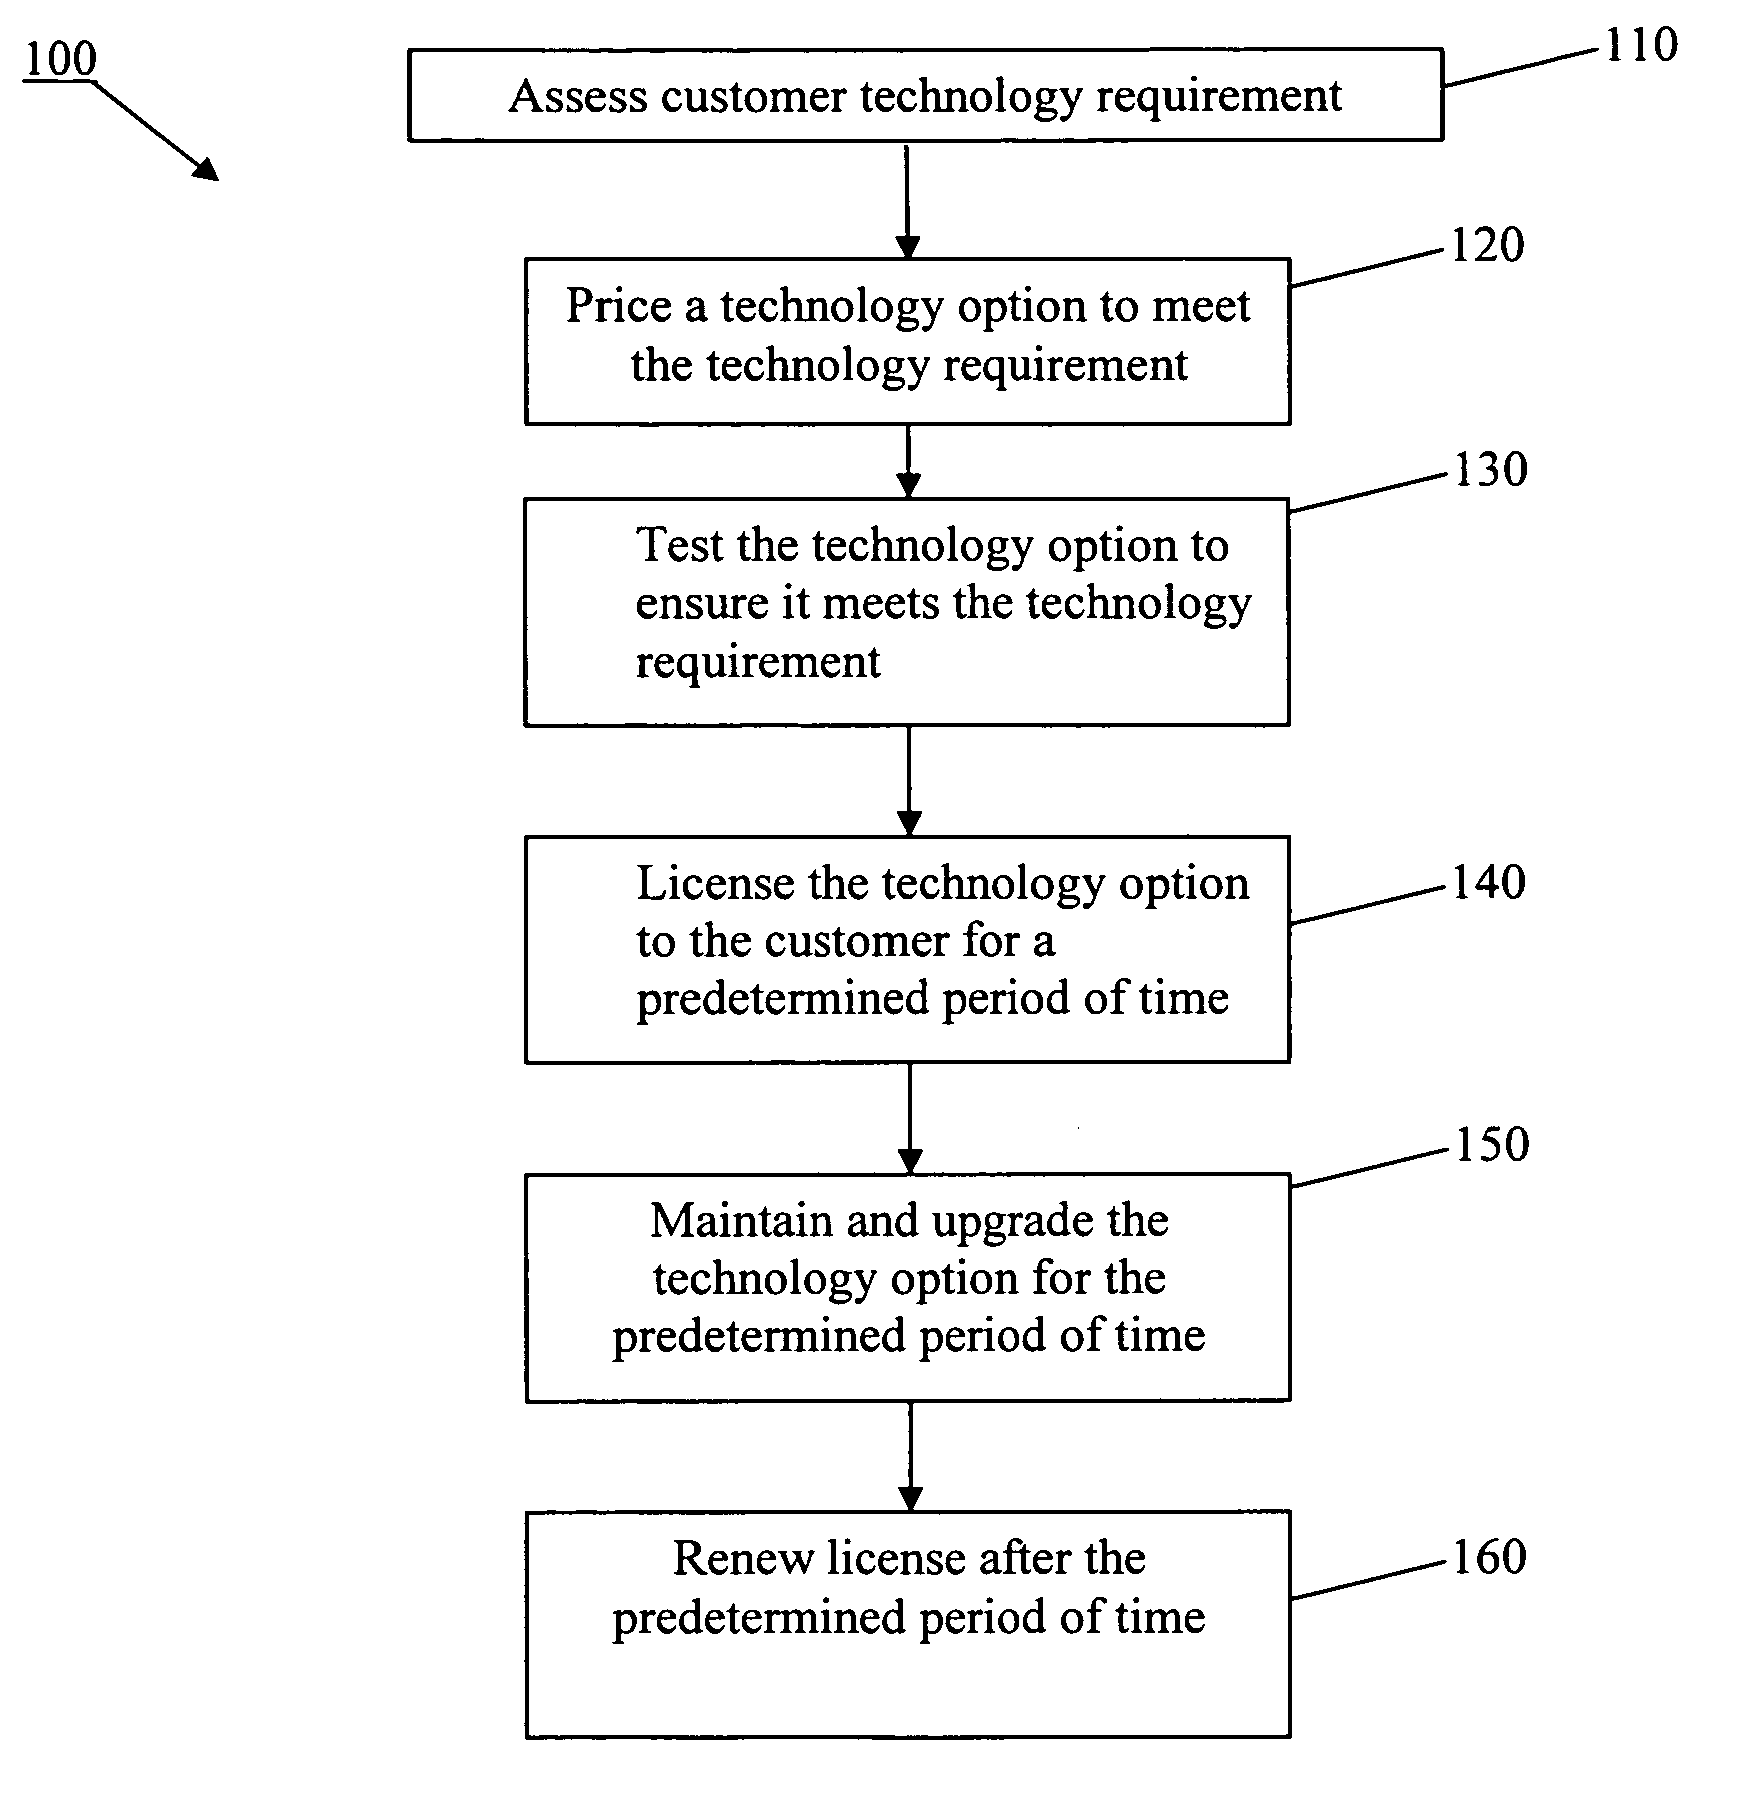 Methods of customizing, licensing and sustaining a technology option to meet a customer requirement